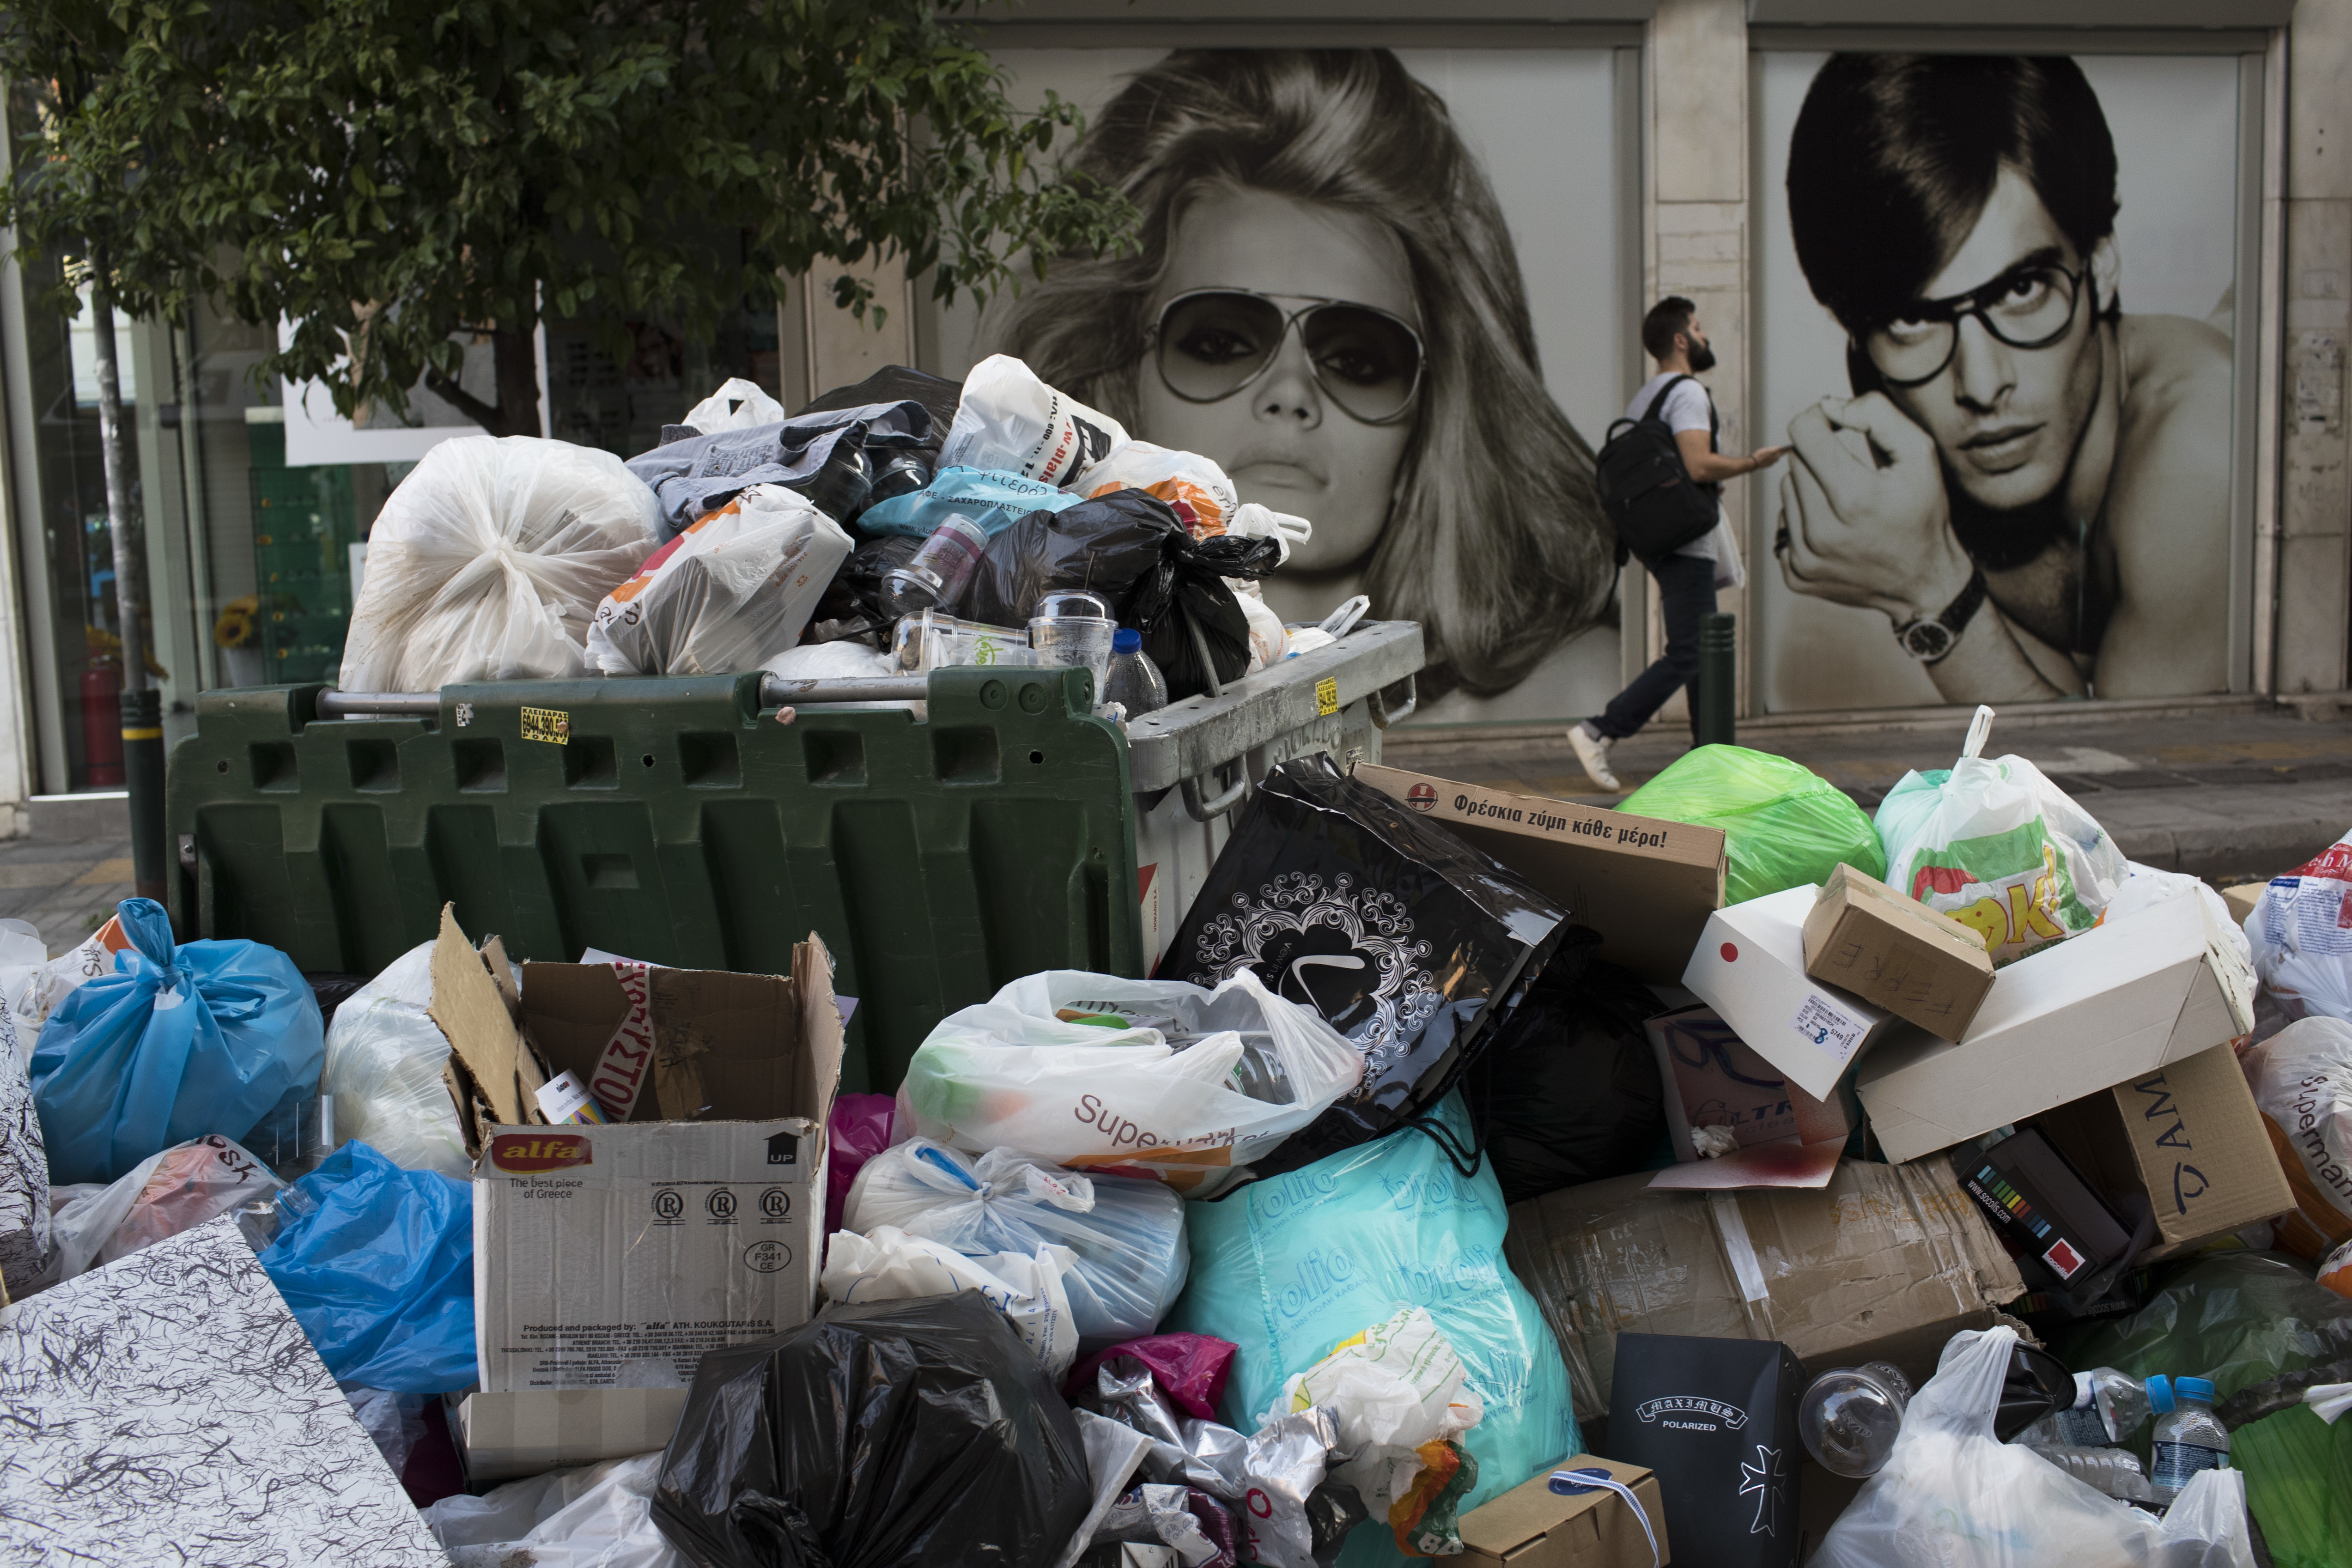 A man walk next an optical shop behind a pile of garbage in Piraeus, near Athens, on Monday, June 26, 2017. Municipality workers have been on strike for almost a week, hindering trash collection across the country. (AP Photo/Petros Giannakouris)